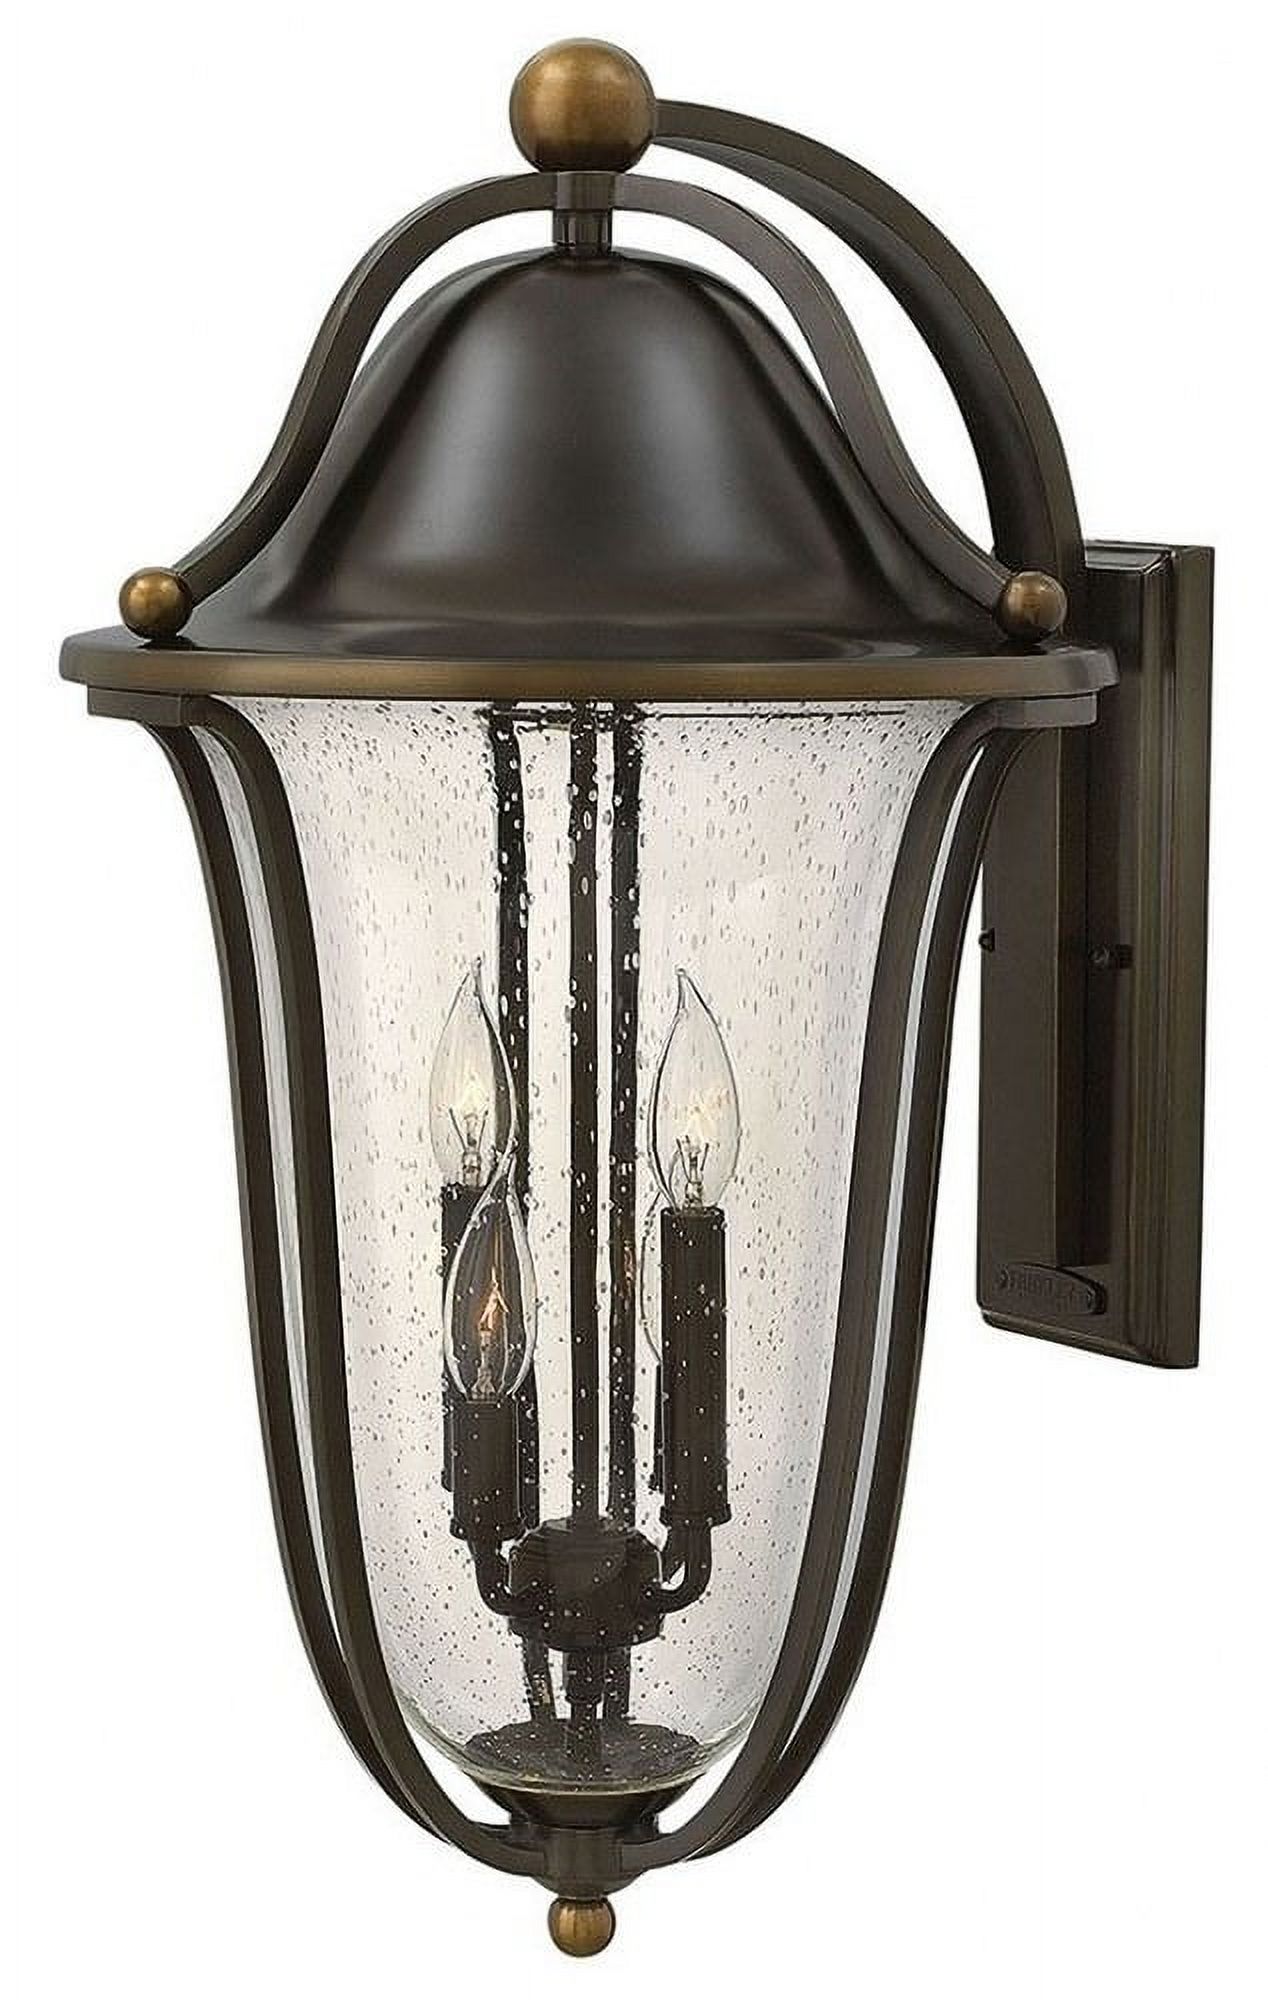 Hinkley Lighting 2649 4-Light Outdoor Lantern Wall Sconce from the Bolla Collection - image 1 of 2